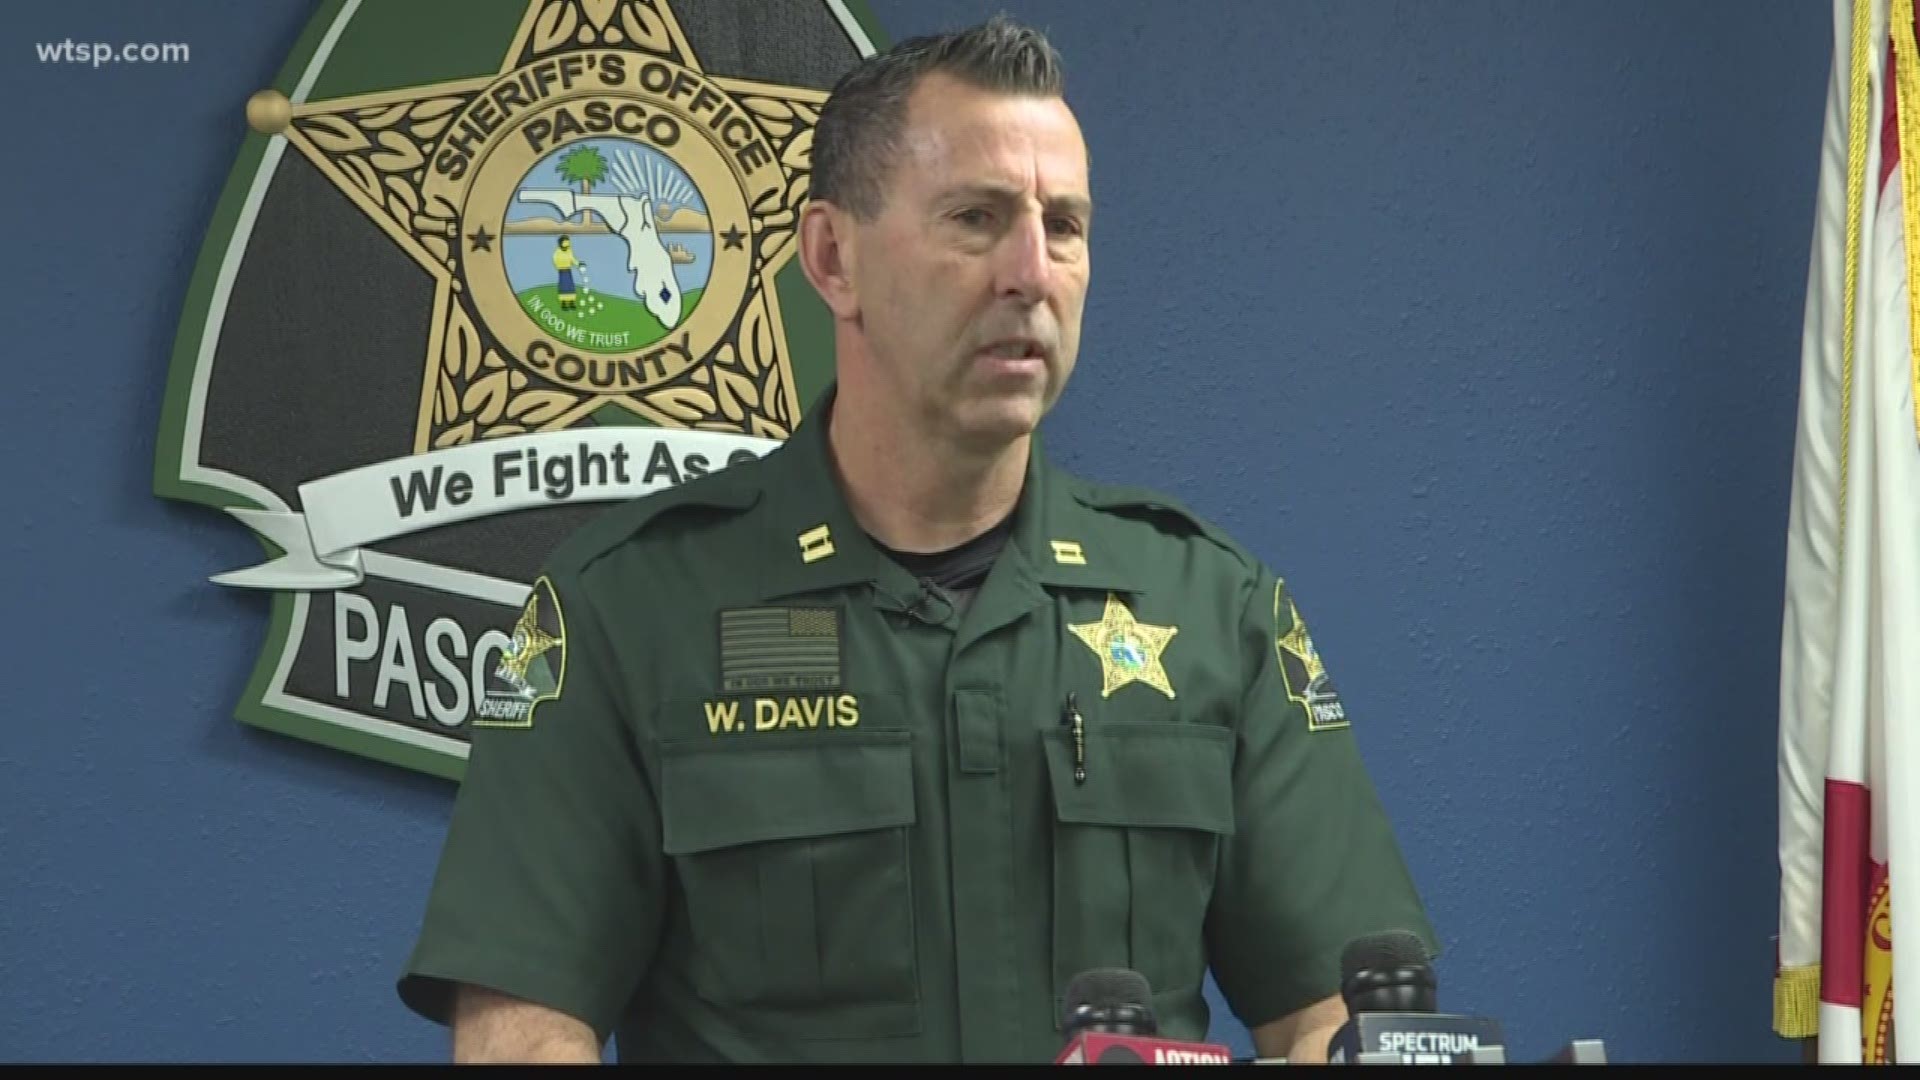 Pasco County schools saw an extra law enforcement presence on the anniversary of the Parkland school shooting.